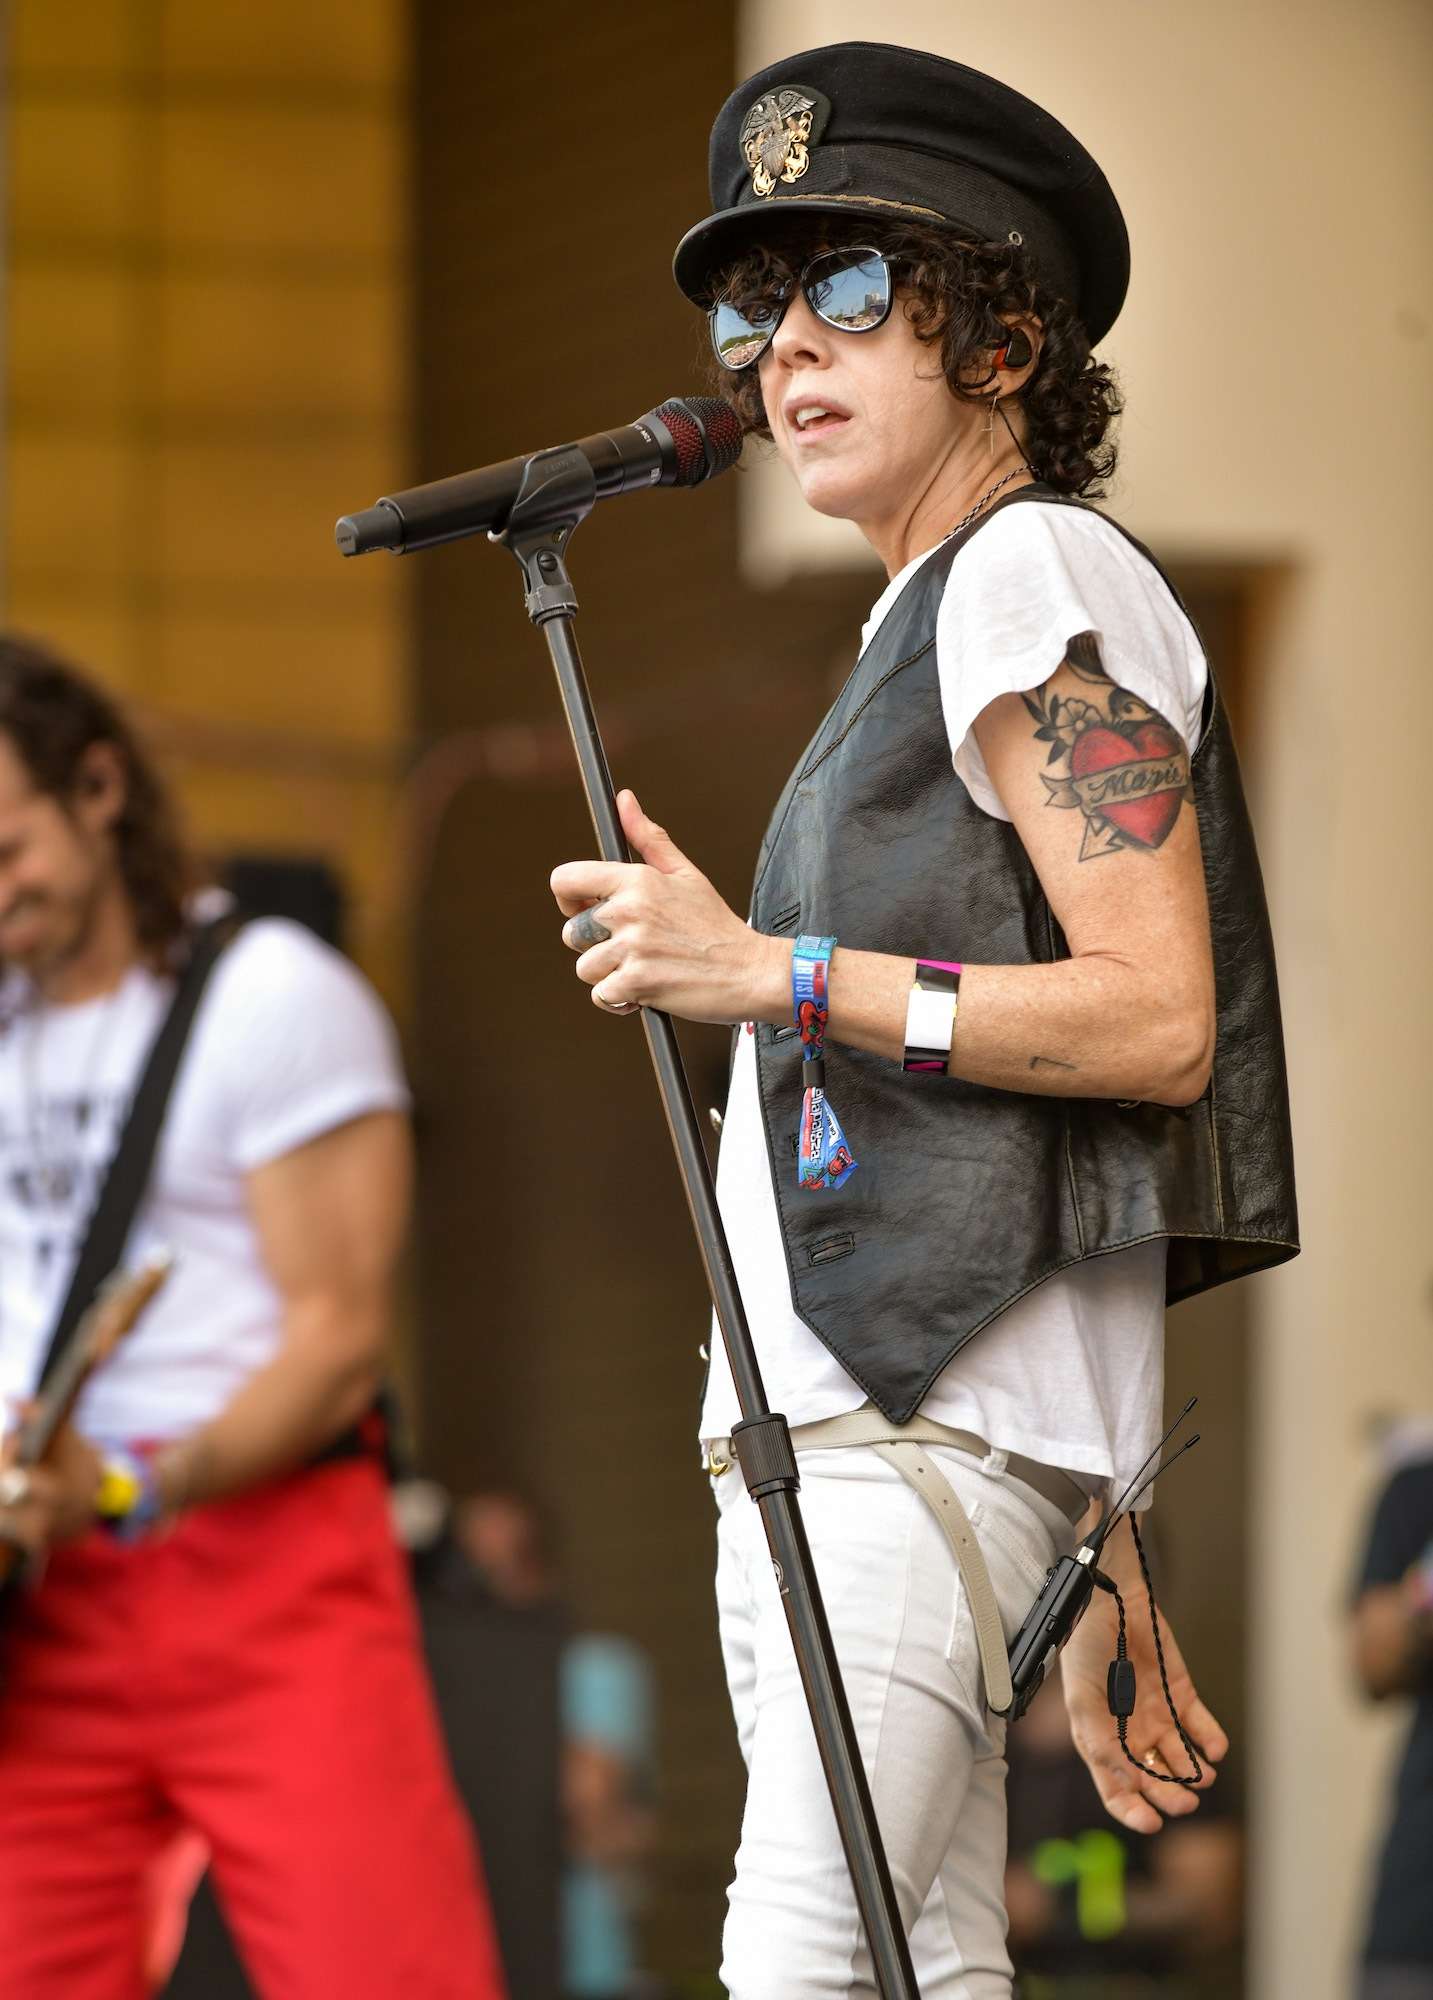 LP Live at Lollapalooza [GALLERY] 8